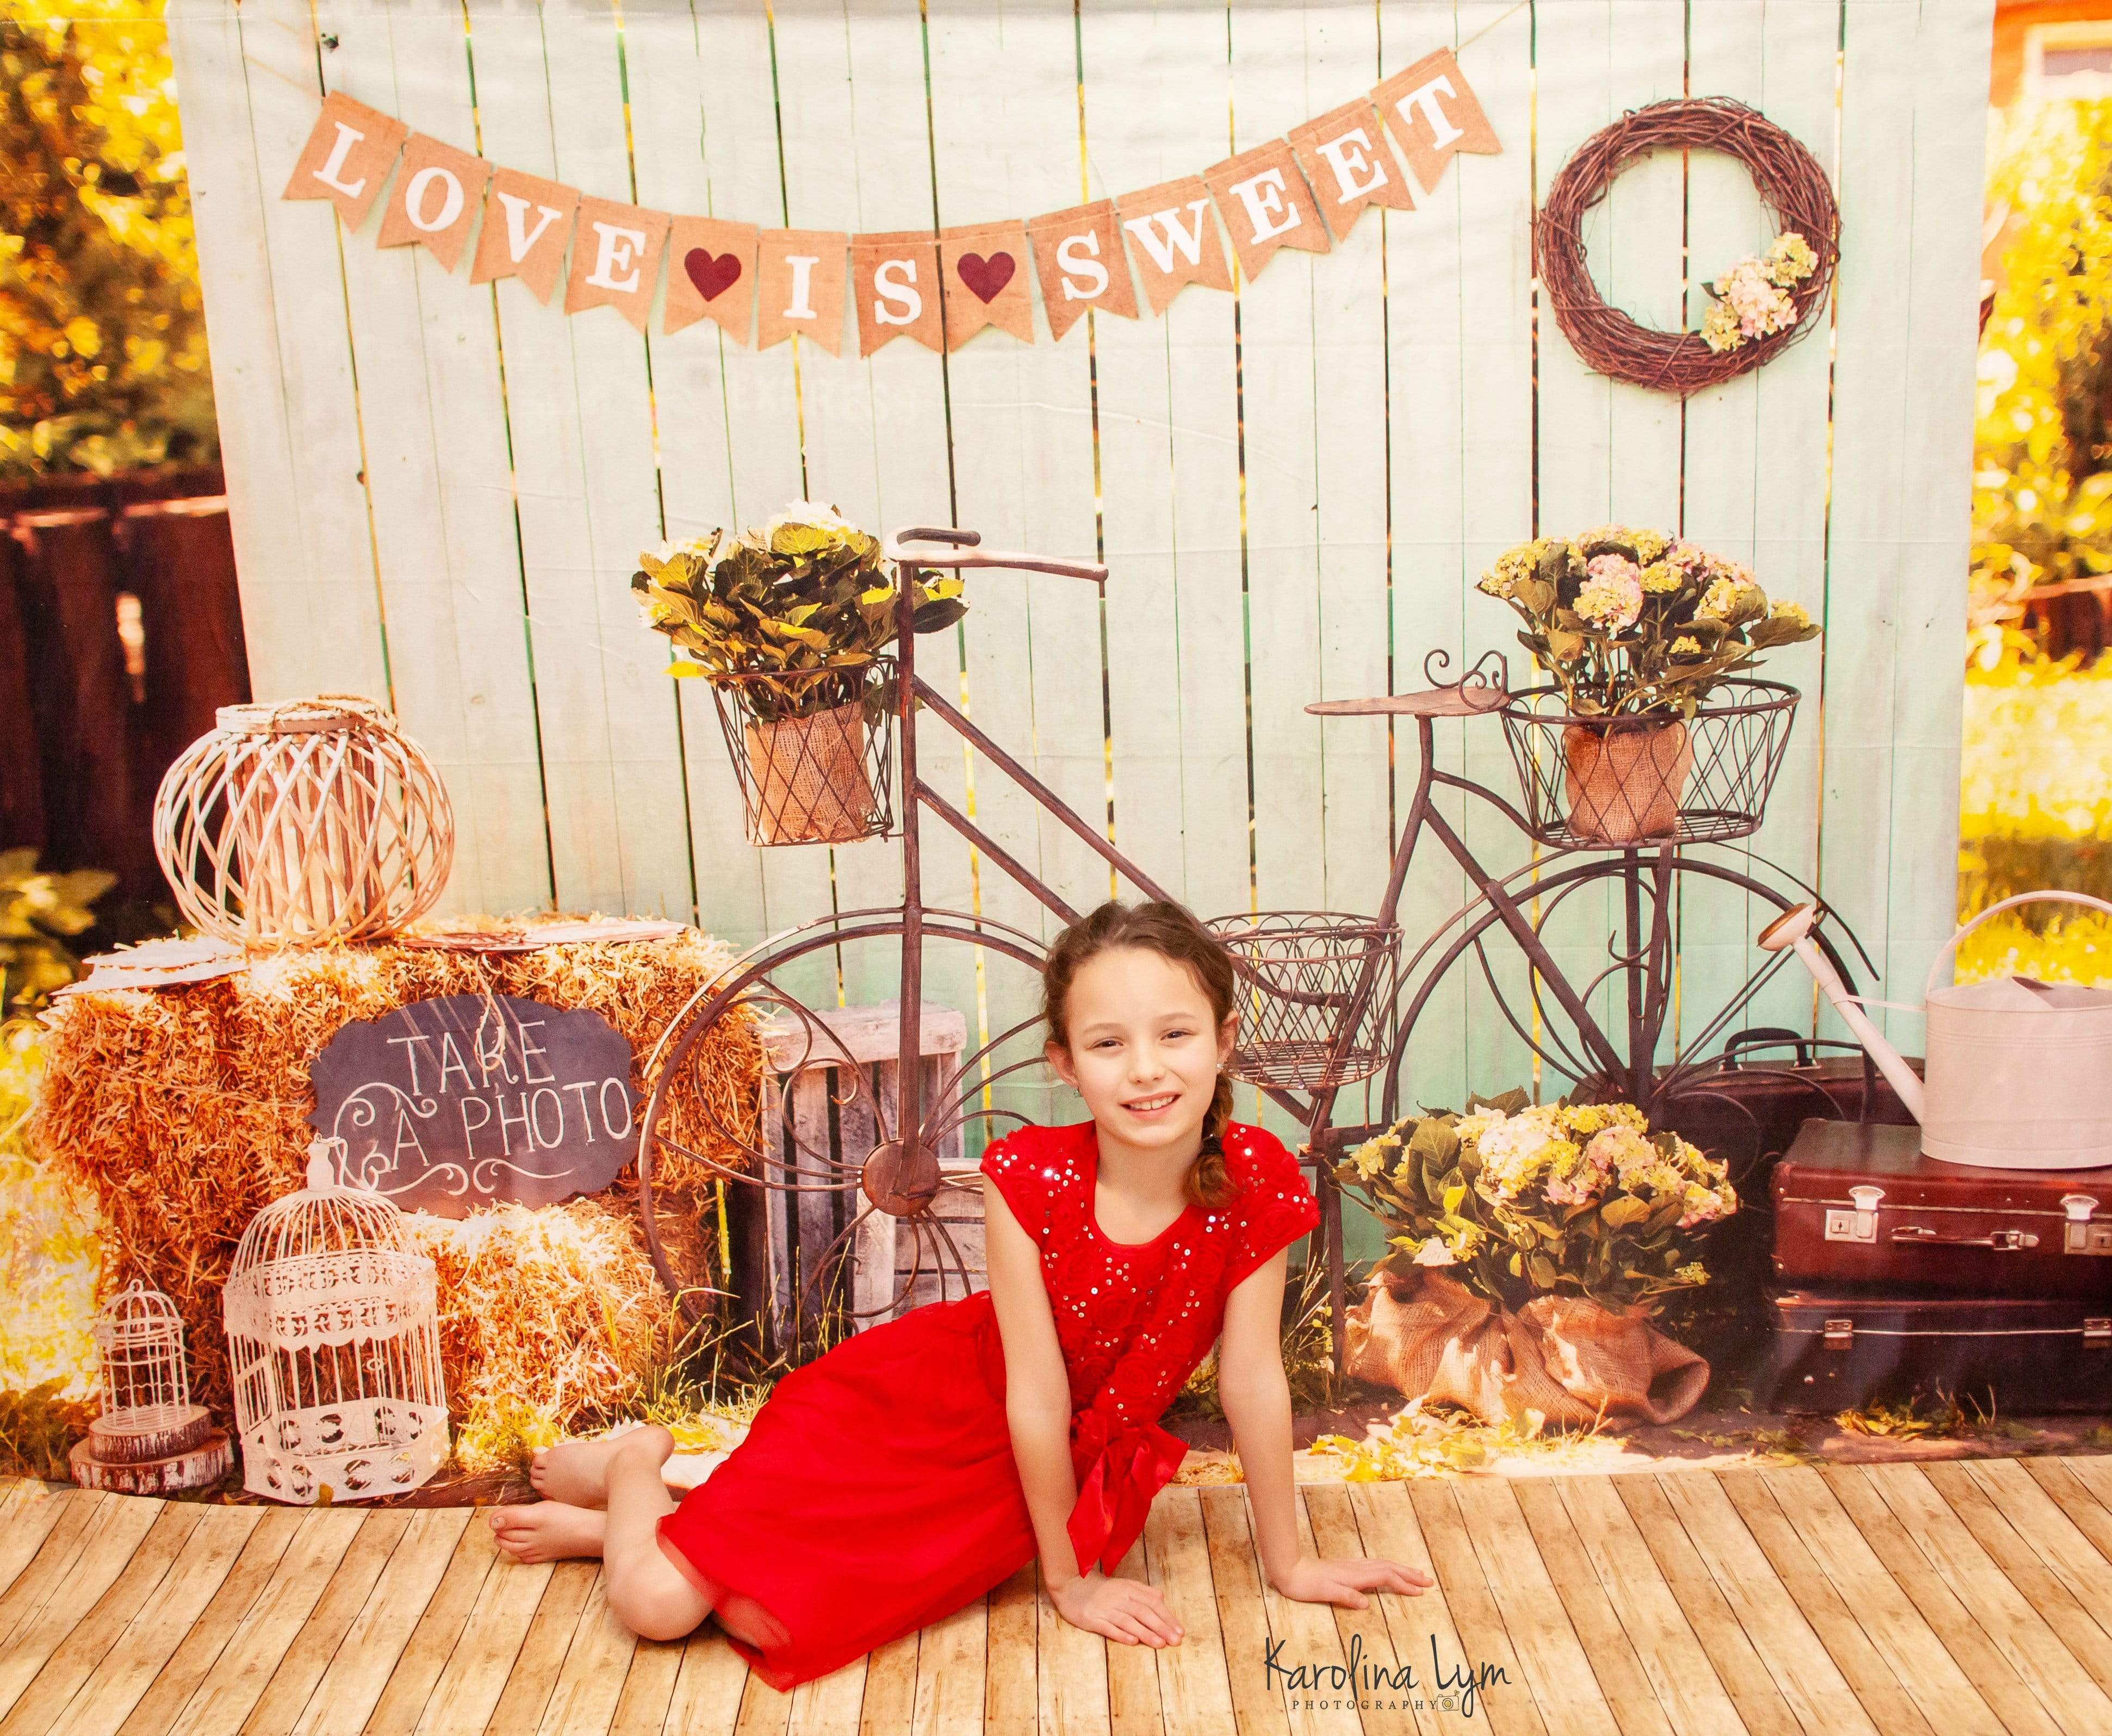 Kate Grass With Bicycle Valentine's Day Backdrop for Photography